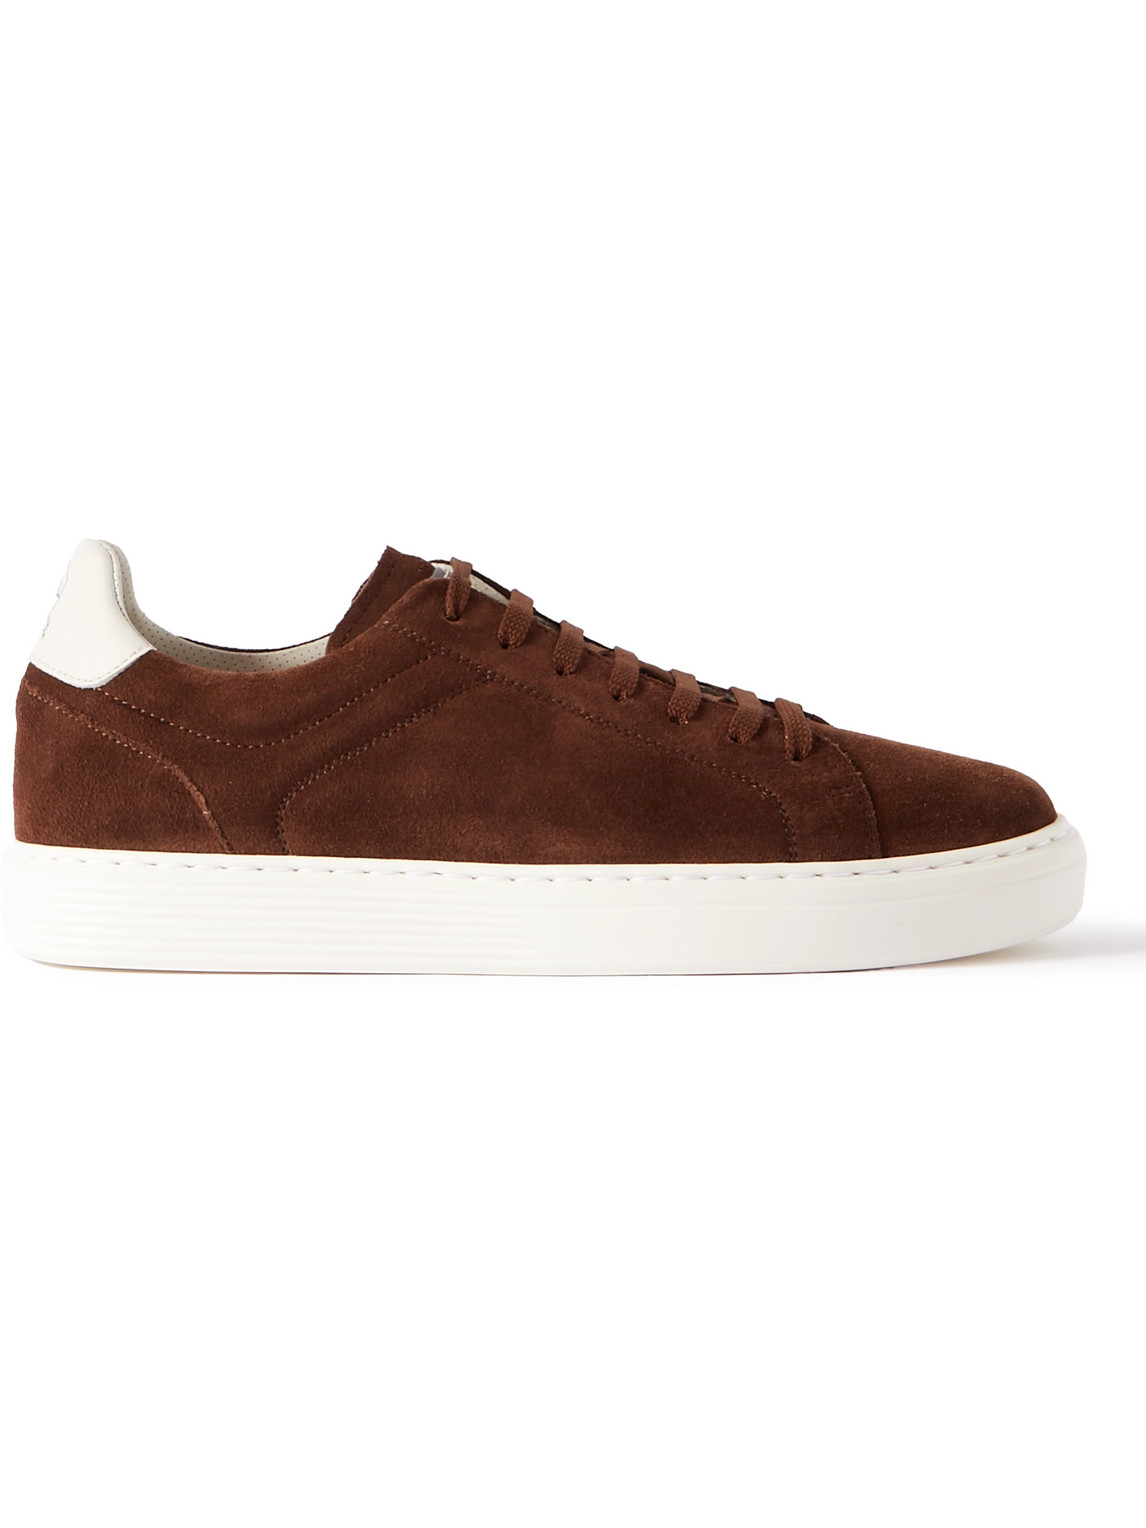 Brunello Cucinelli Urano Leather-trimmed Suede Sneakers In Brown